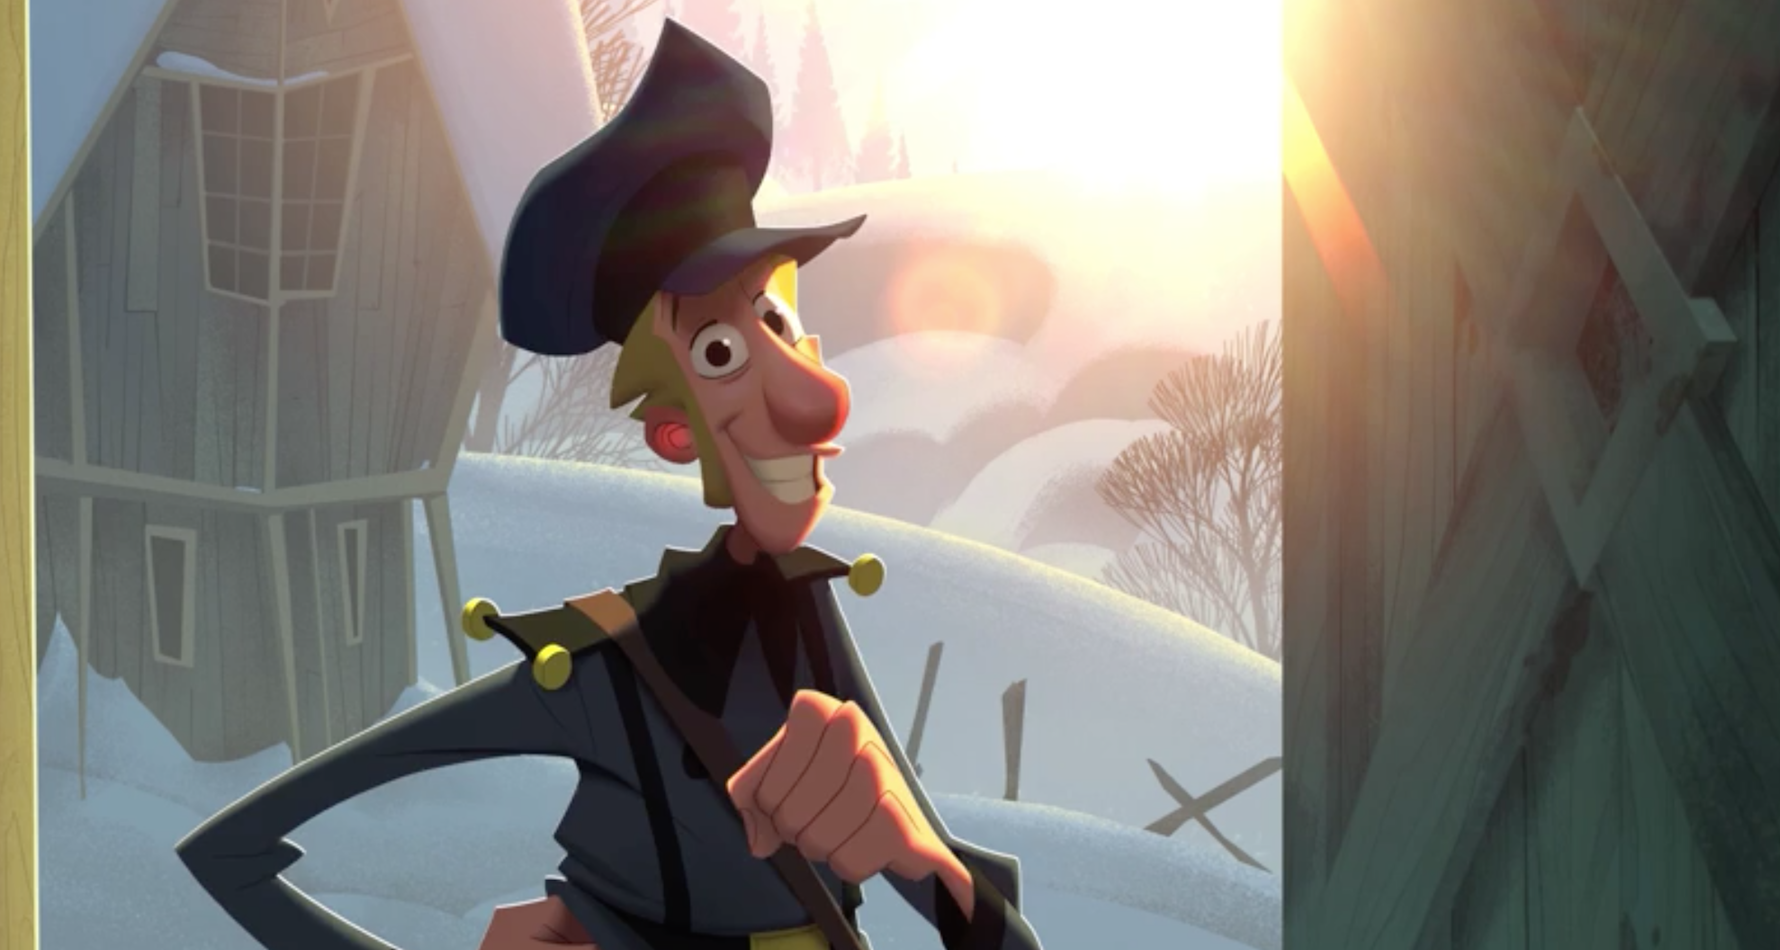 Netflix Releases Footage For First Animated Film 'Klaus' - mxdwn Movies